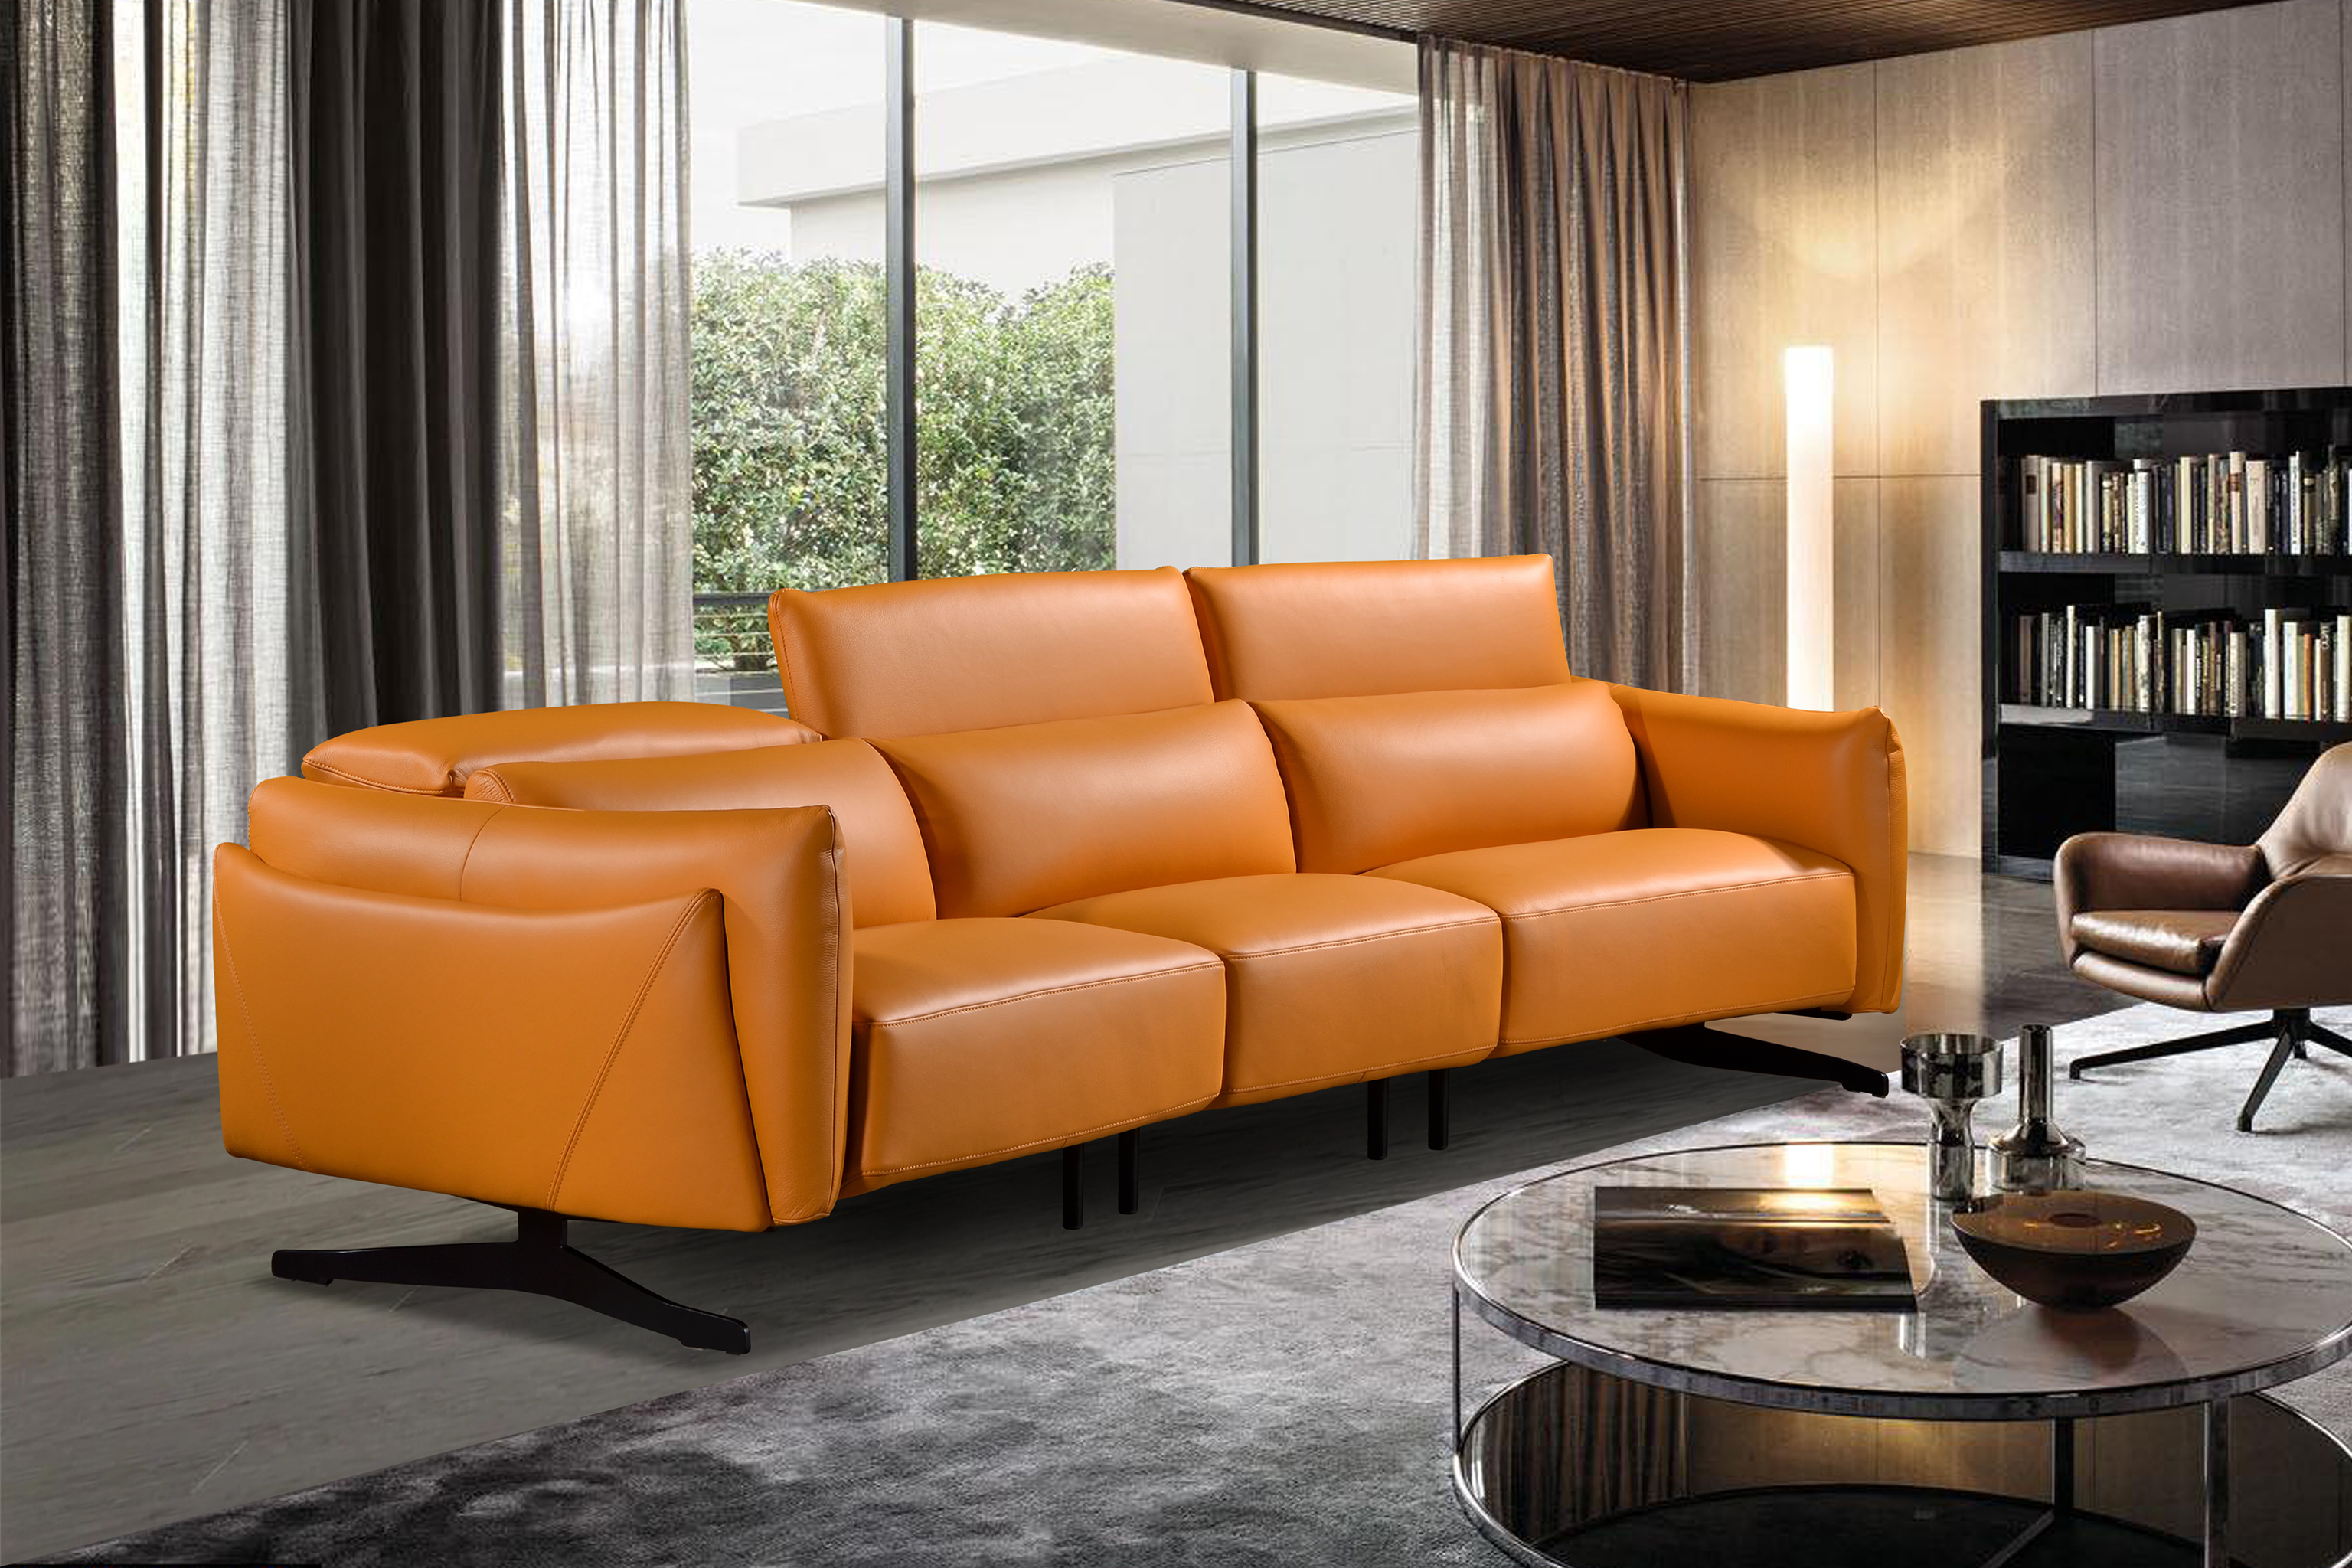 CHATEAU 3.5 Seater Sofa in Leather by Castilla